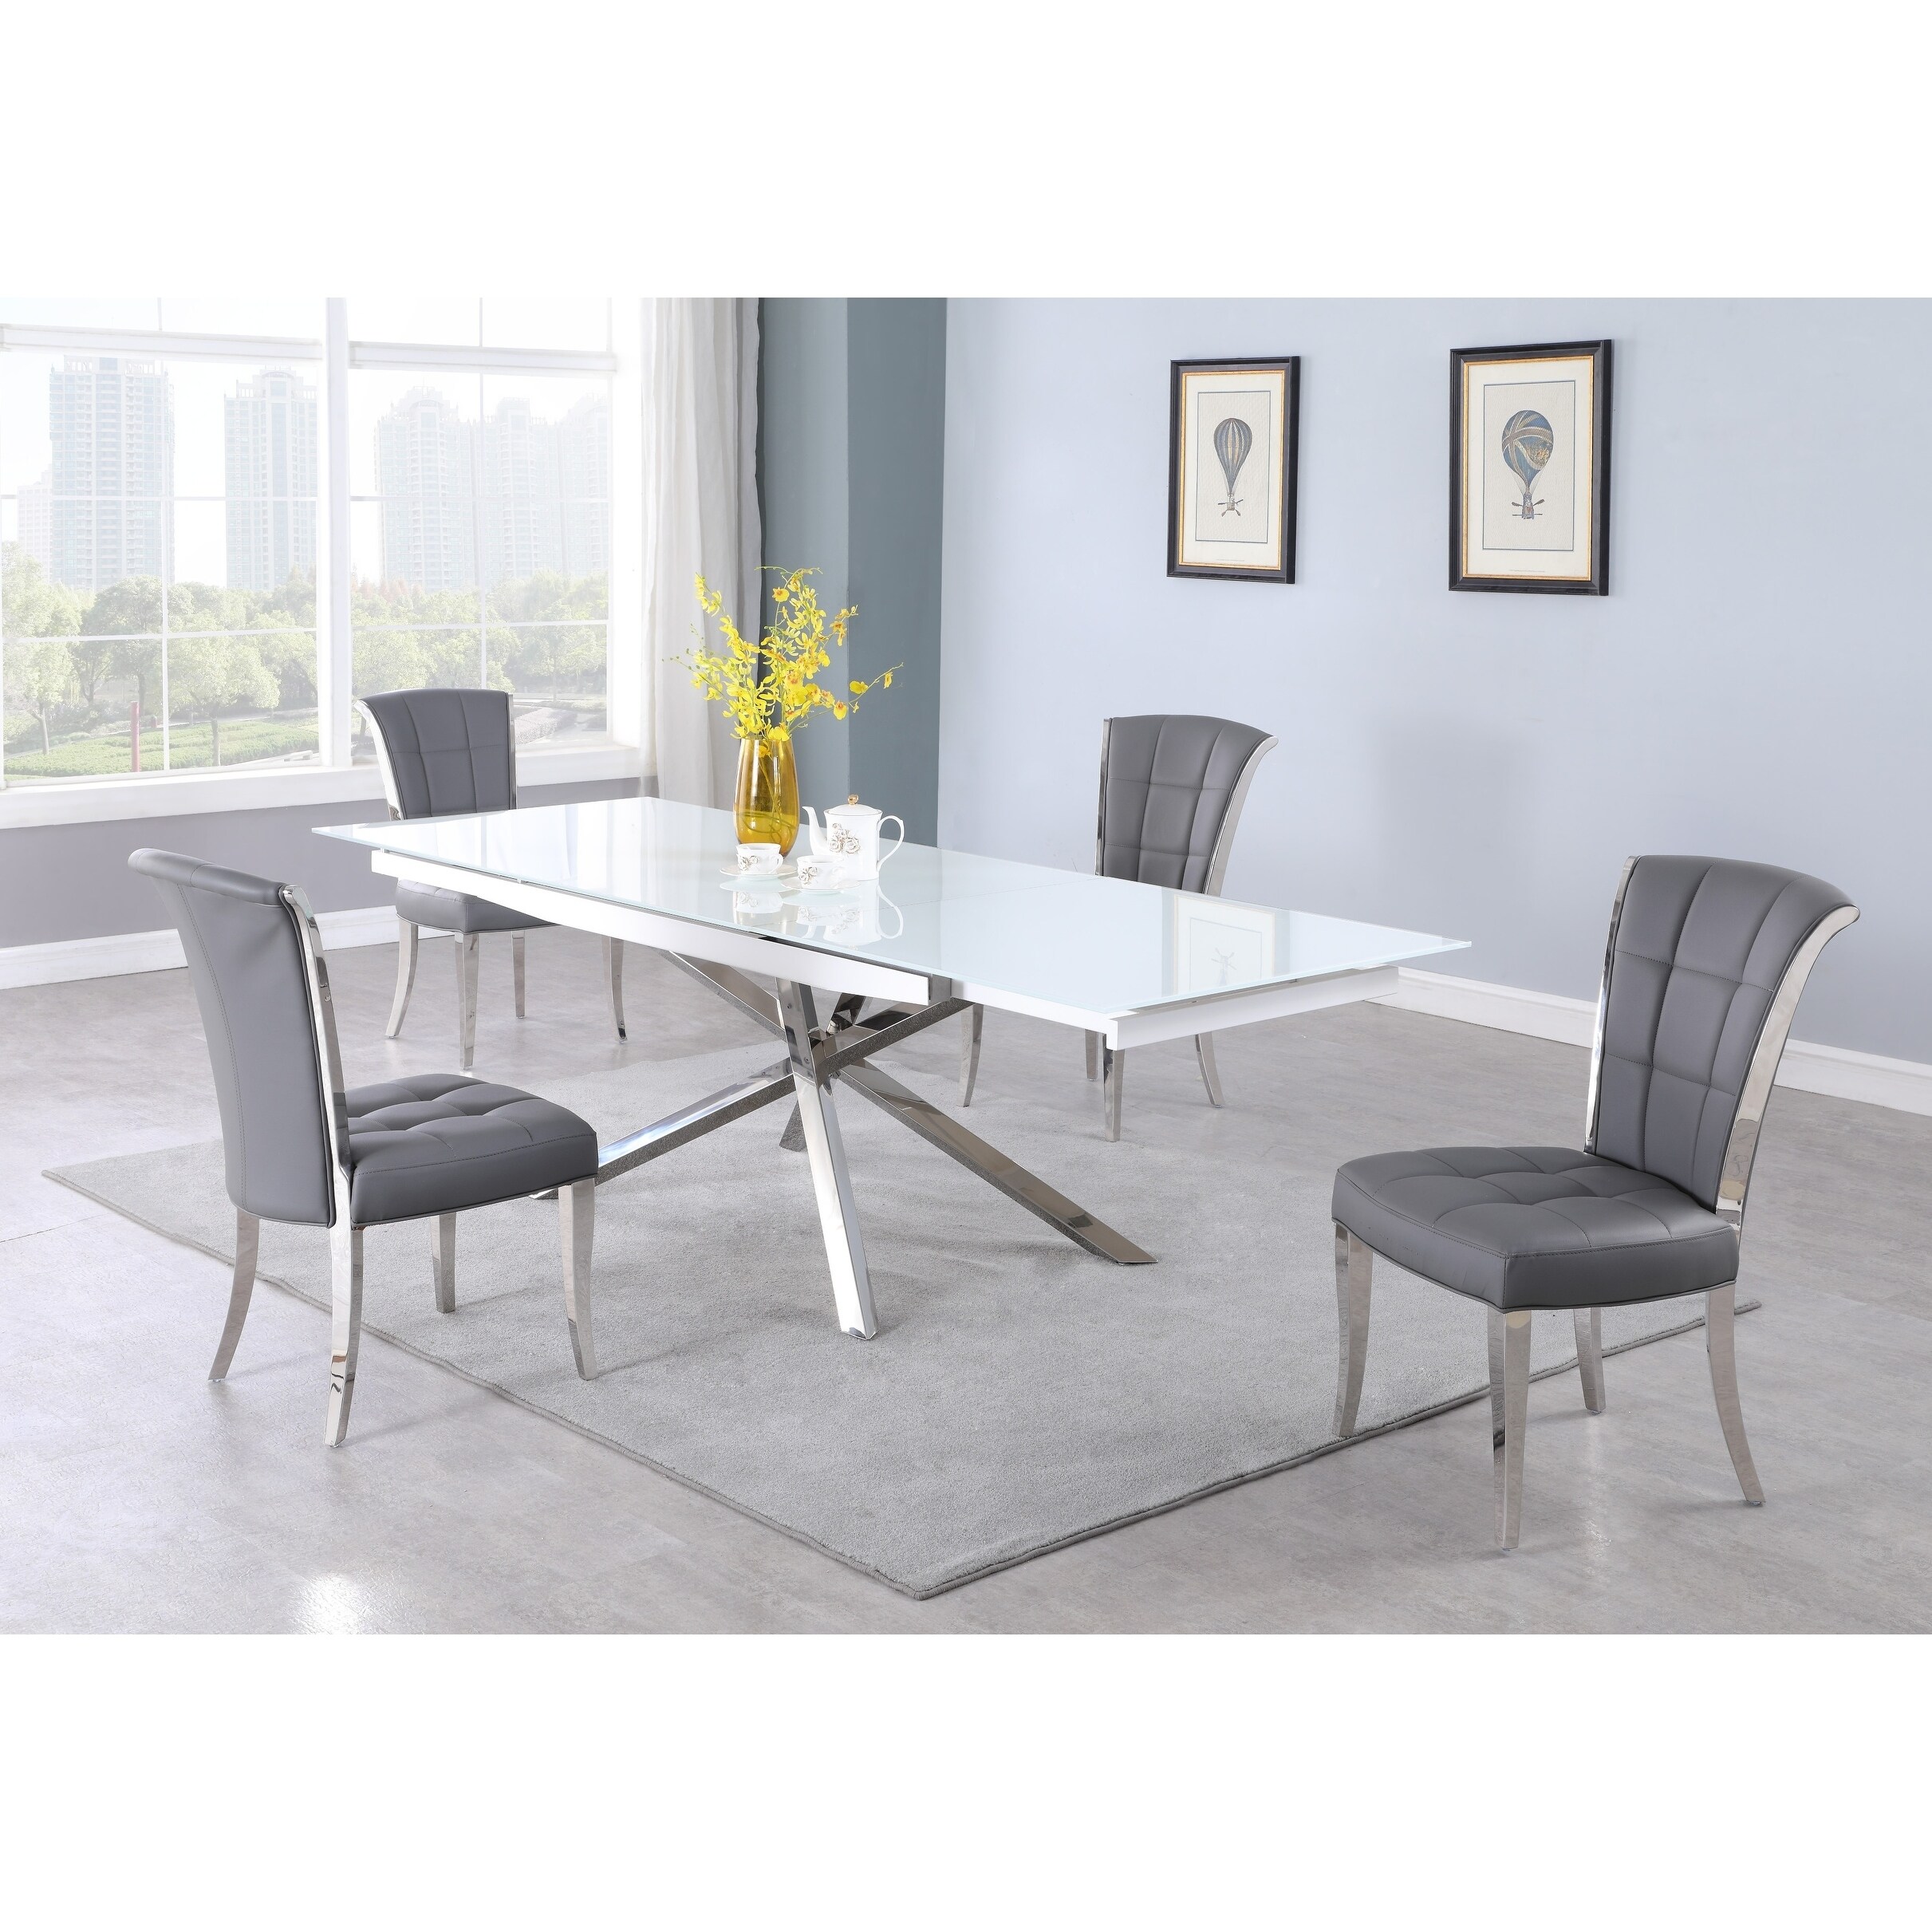 Somette Aurelia Super White Starphire Glass Dining Table With Criss Cross Base 35 X 63 Overstock 31109312